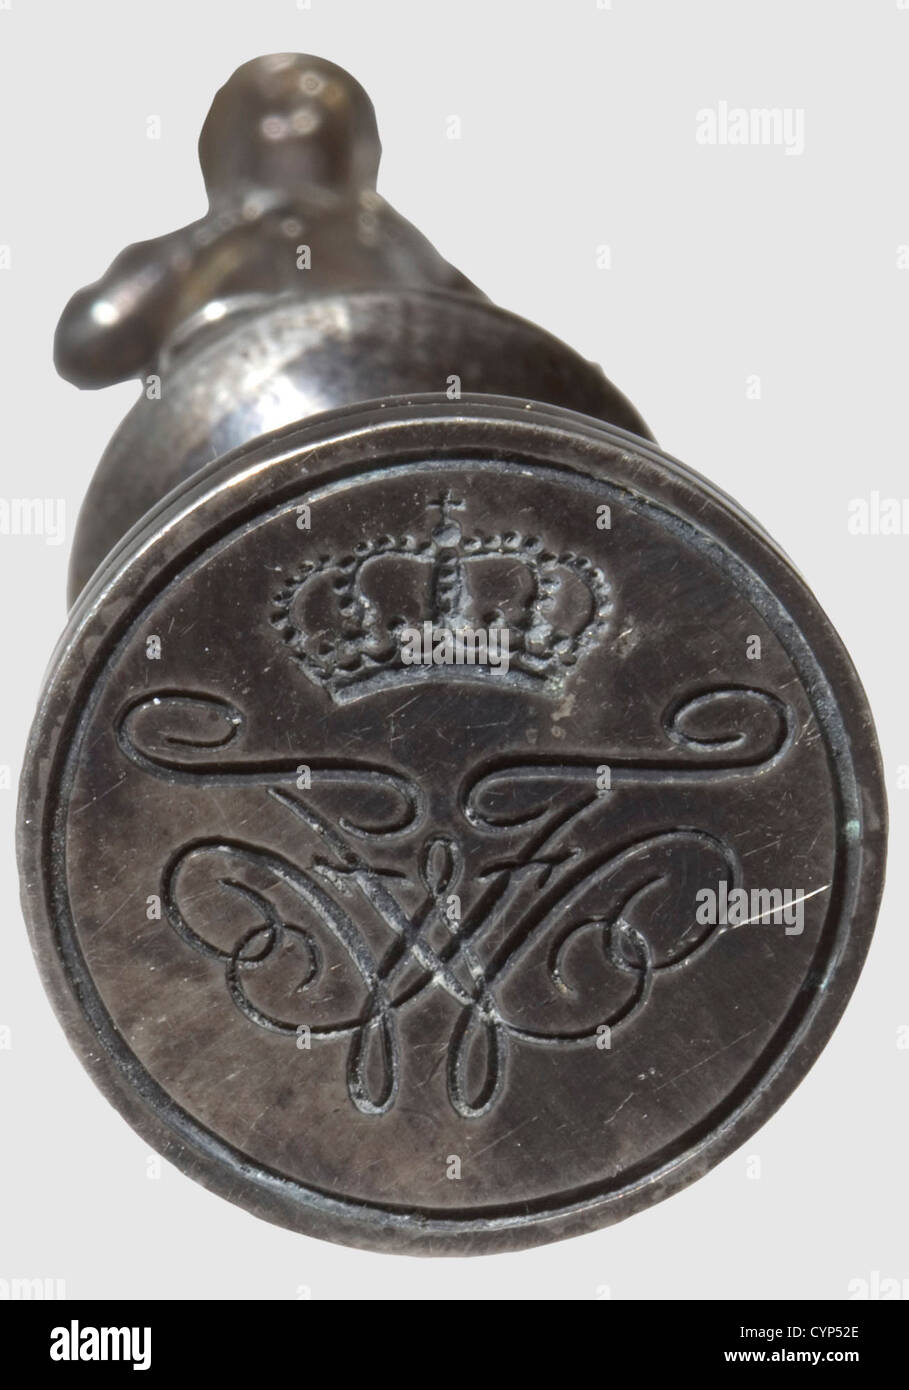 King Friedrich Wilhelm III of Prussia(1770 - 1840)- personal silver seal in seal stand,Silver and gilt silver.The seal in the shape of a small statue of the king with overcoat and cap on a base.The seal matrix cut with his typical mirror cipher 'FW' under the royal Prussian crown.Height 6 cm.The seal holder of gilt silver,the seal resting on a small socle in the centre of a cenotaph beneath the royal Prussian crown,flanked by two guard grenadiers.Size ca 12.5 x 8 x 6.5 cm.Provenance: ZAM - Zentrum für Außergewöhnliche Museen,München(Centre for Exce,Additional-Rights-Clearences-Not Available Stock Photo